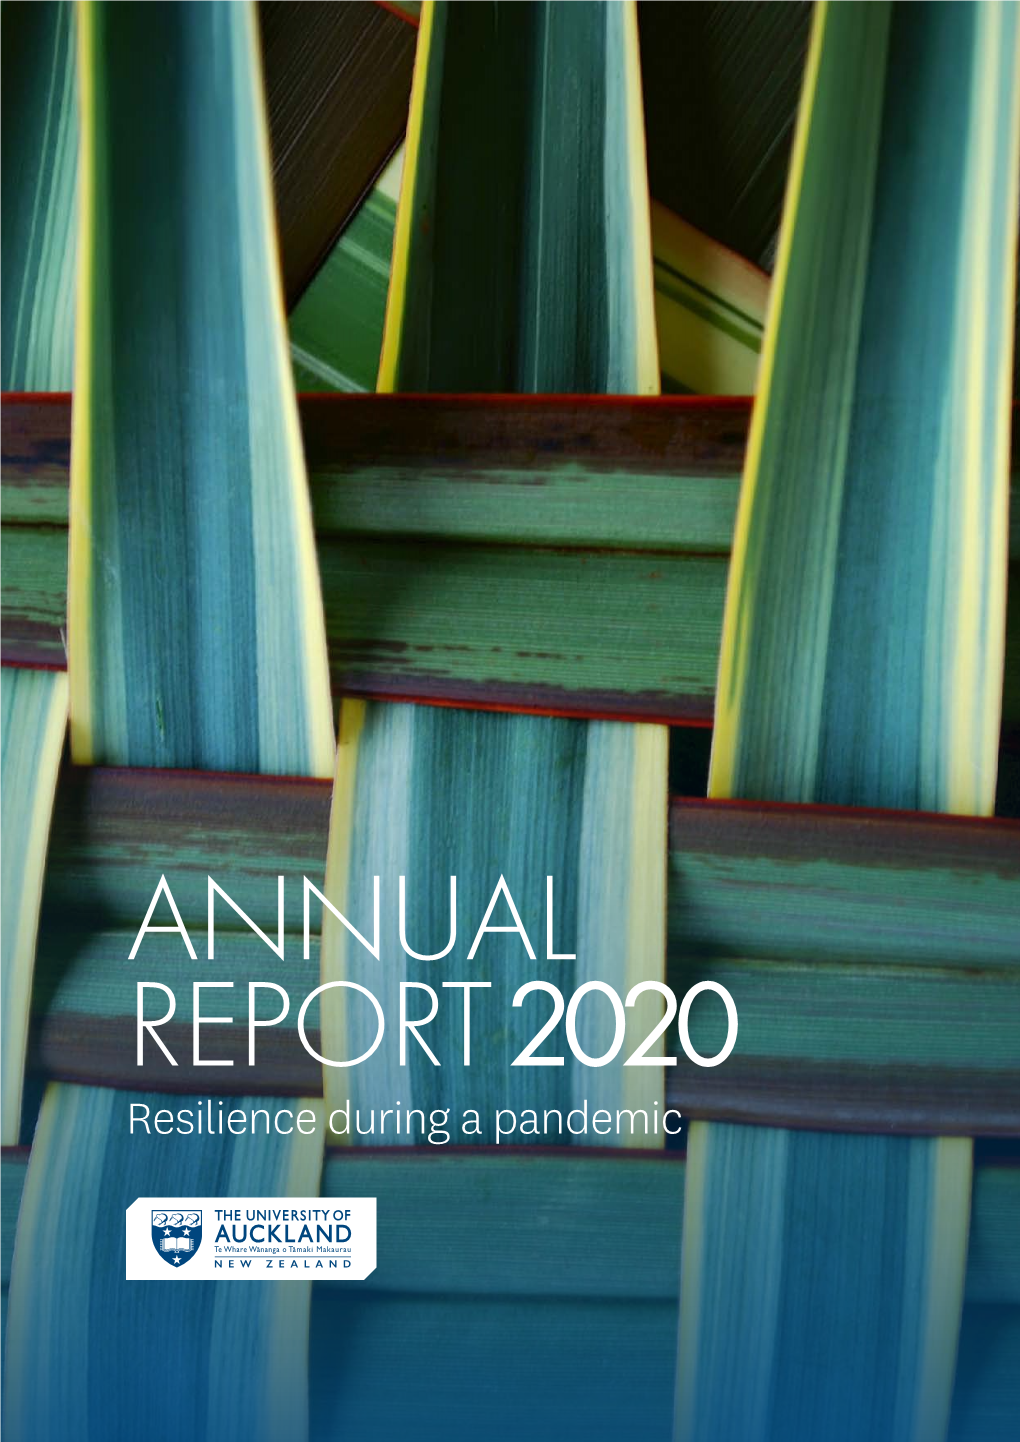 ANNUAL REPORT 2020 Resilience During a Pandemic 2 Overview 01 Chancellor’S Review 4 Vice-Chancellor’S Report 6 Key Facts and Figures 8 University Governance 10